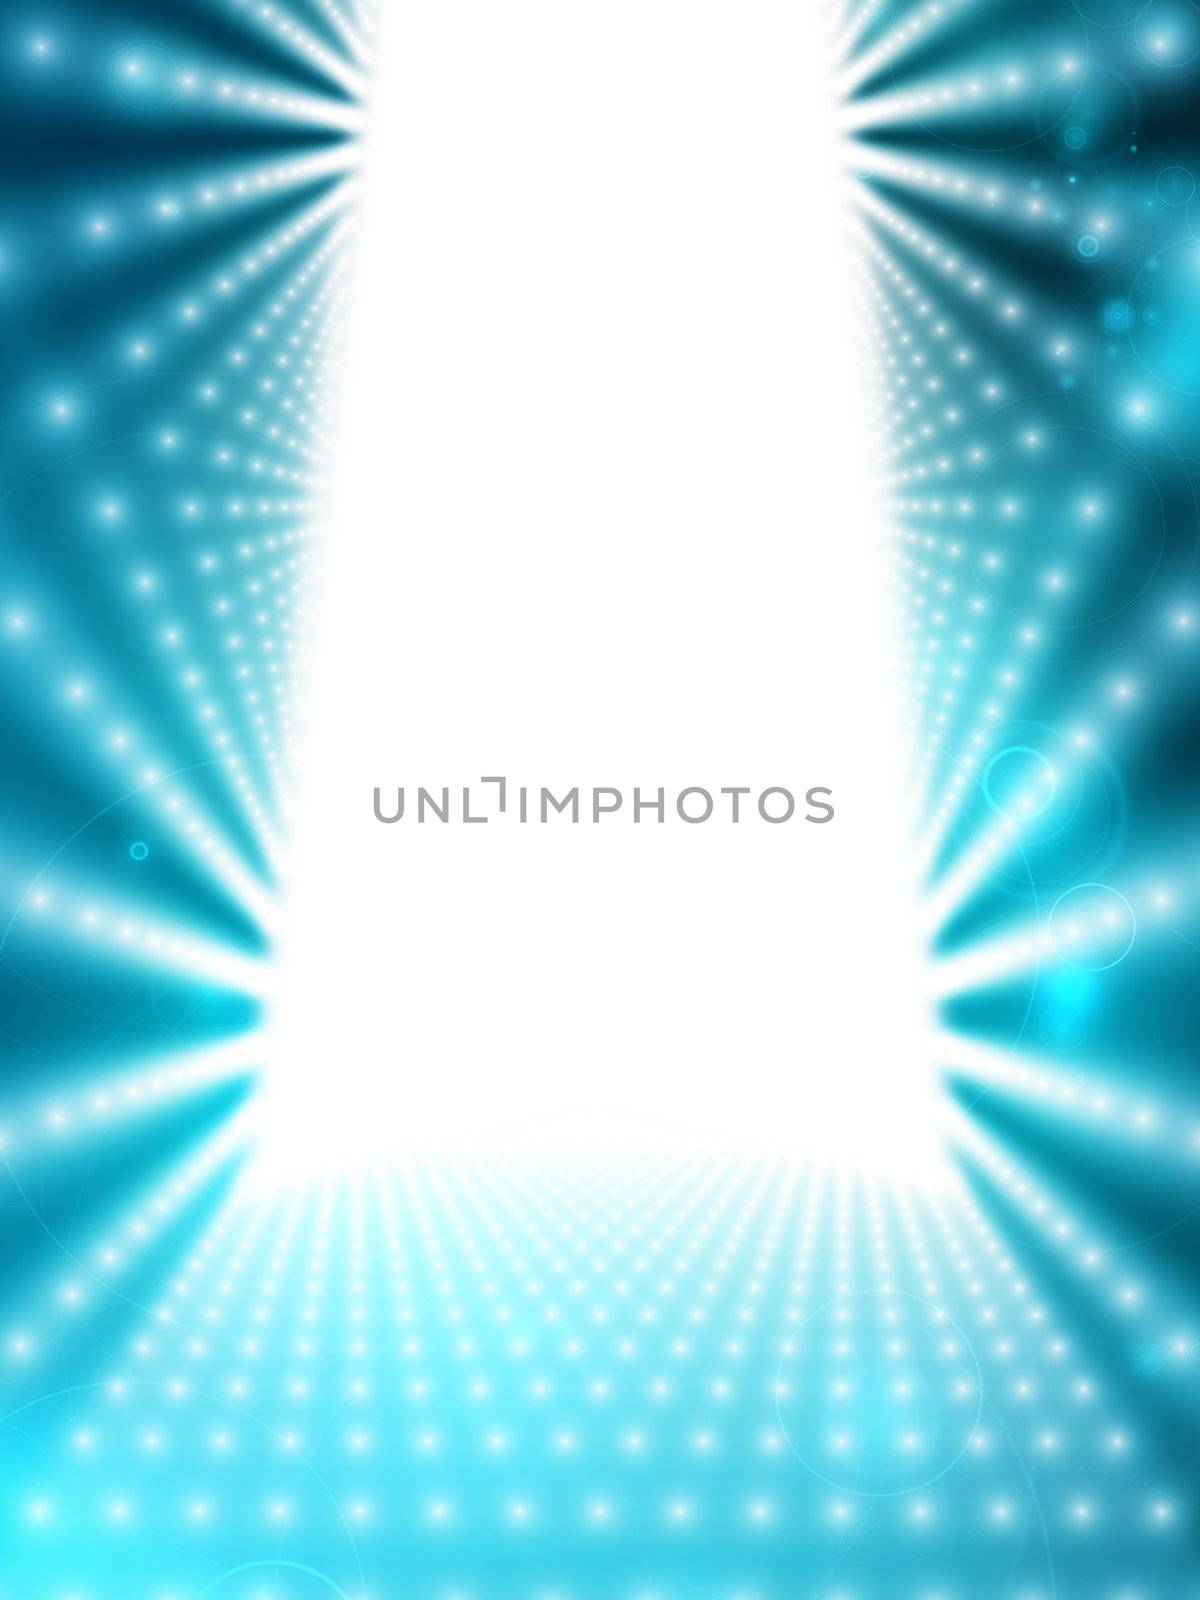 An image of a stage lights background